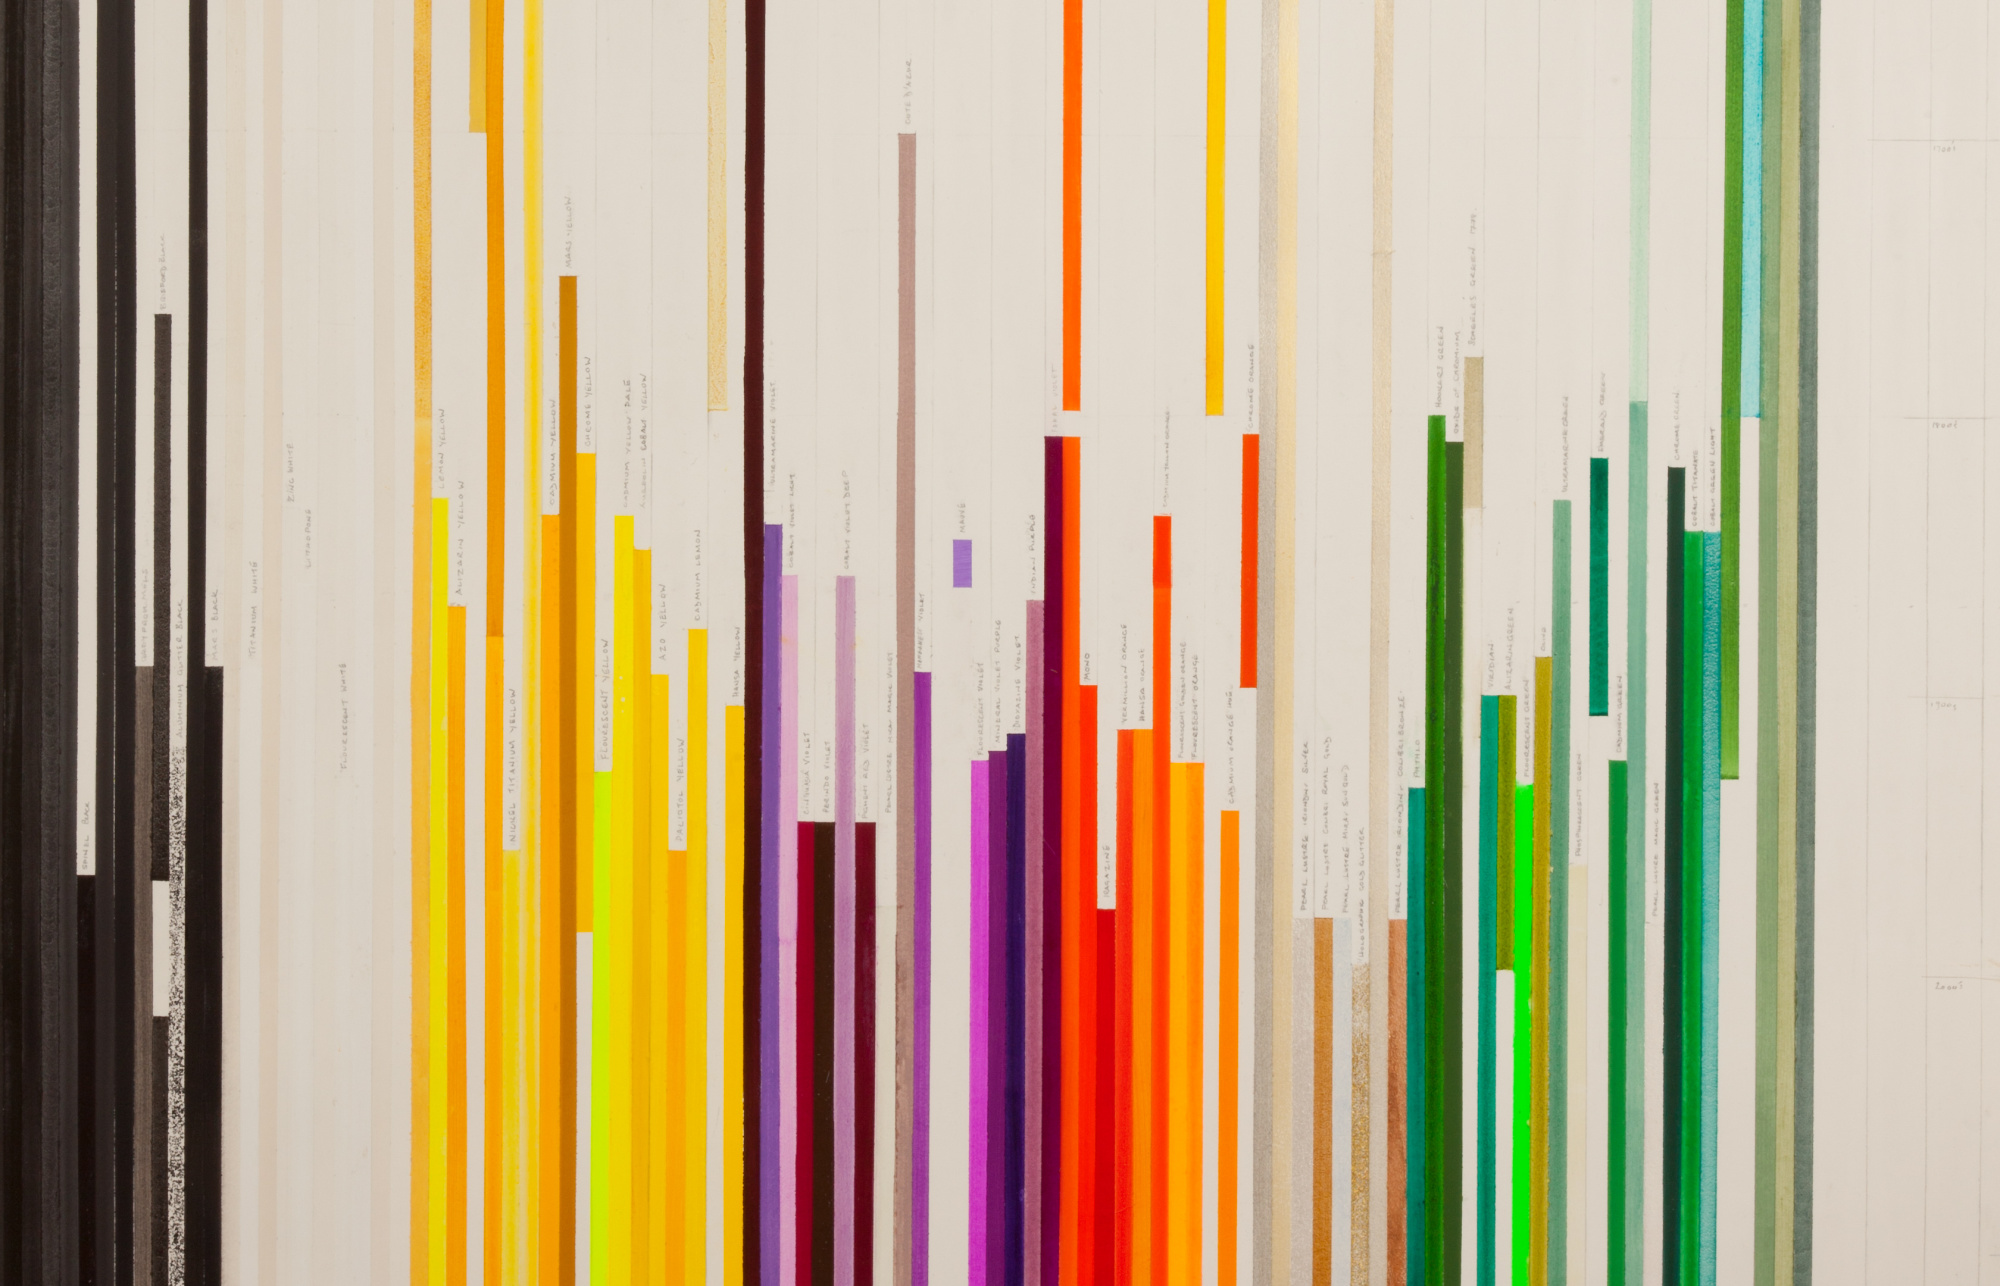 The Pigment Timeline (detail)